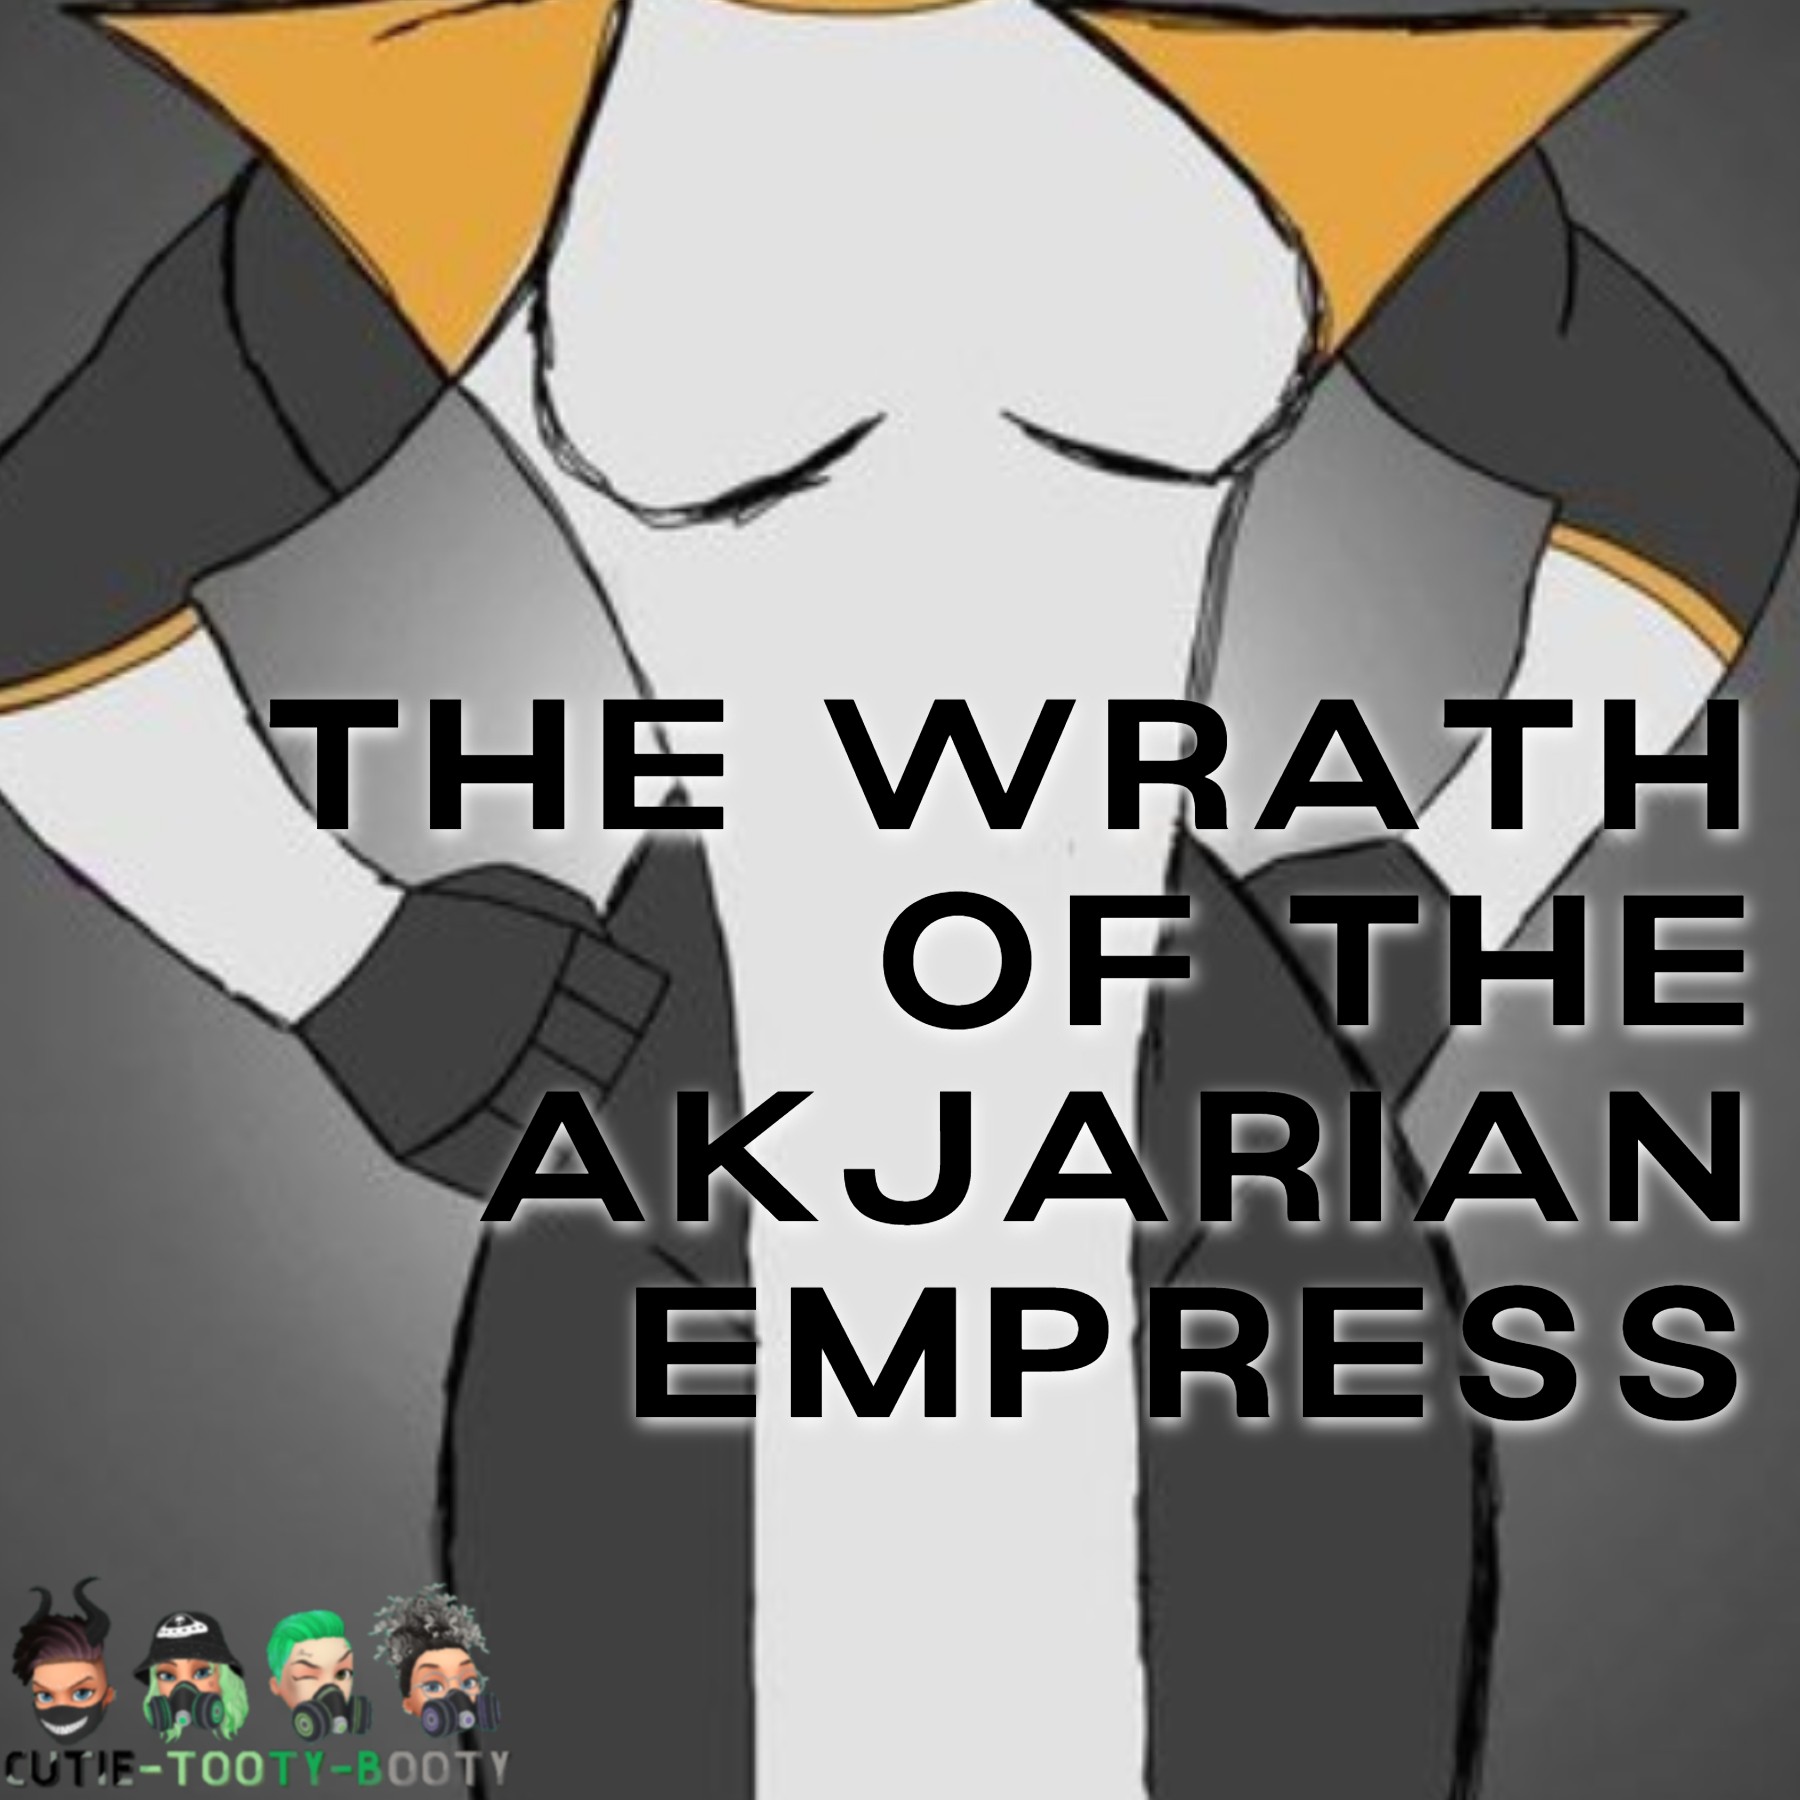 The Wrath Of The Akjarian Empress